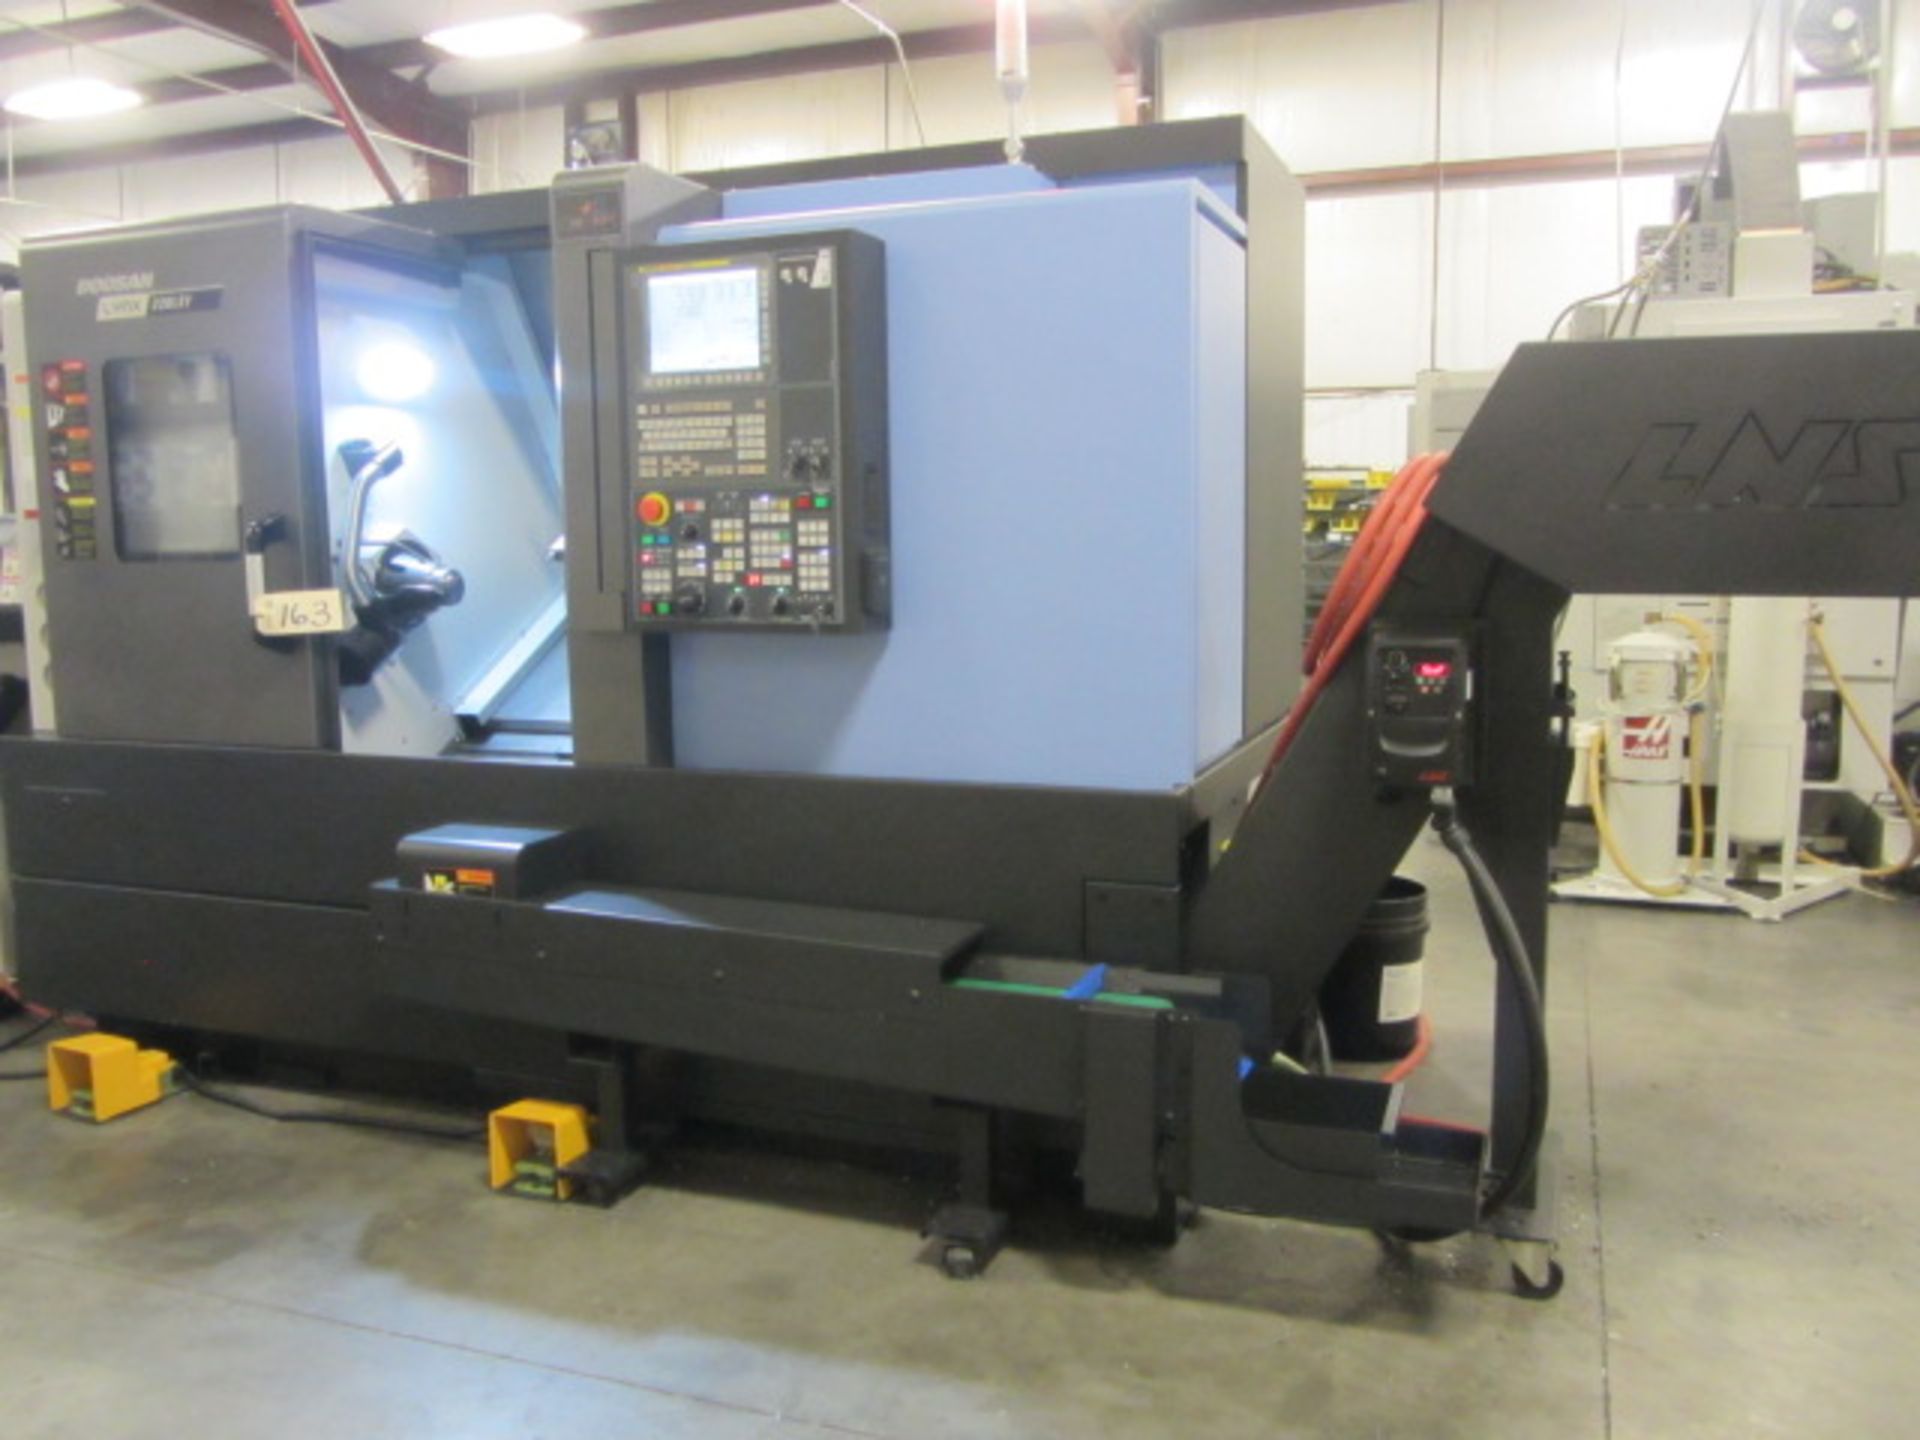 Doosan Lynx 220 LSYC CNC Turning Center with 8.25'' Chuck Main Spindle, 5.5'' Sub-Spindle, Y- - Image 3 of 8